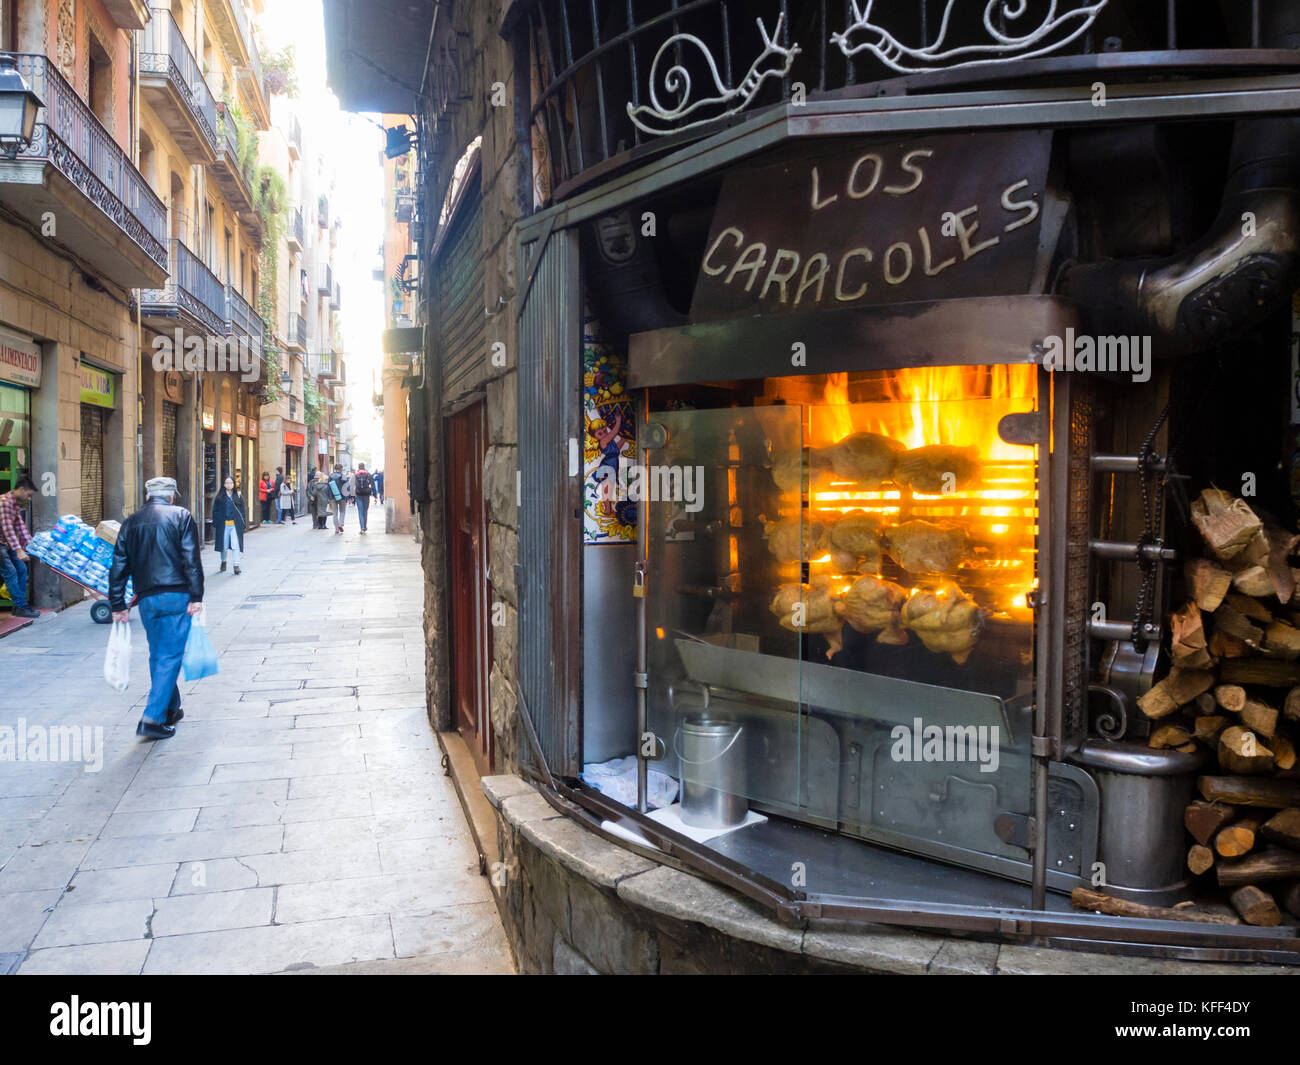 Barcelona, Spain - 11 Nov 2016: Chicken on a spit are rotating on the rotisserie grill of Barcelona's famous restaurant 'Los Caracoles'. Stock Photo